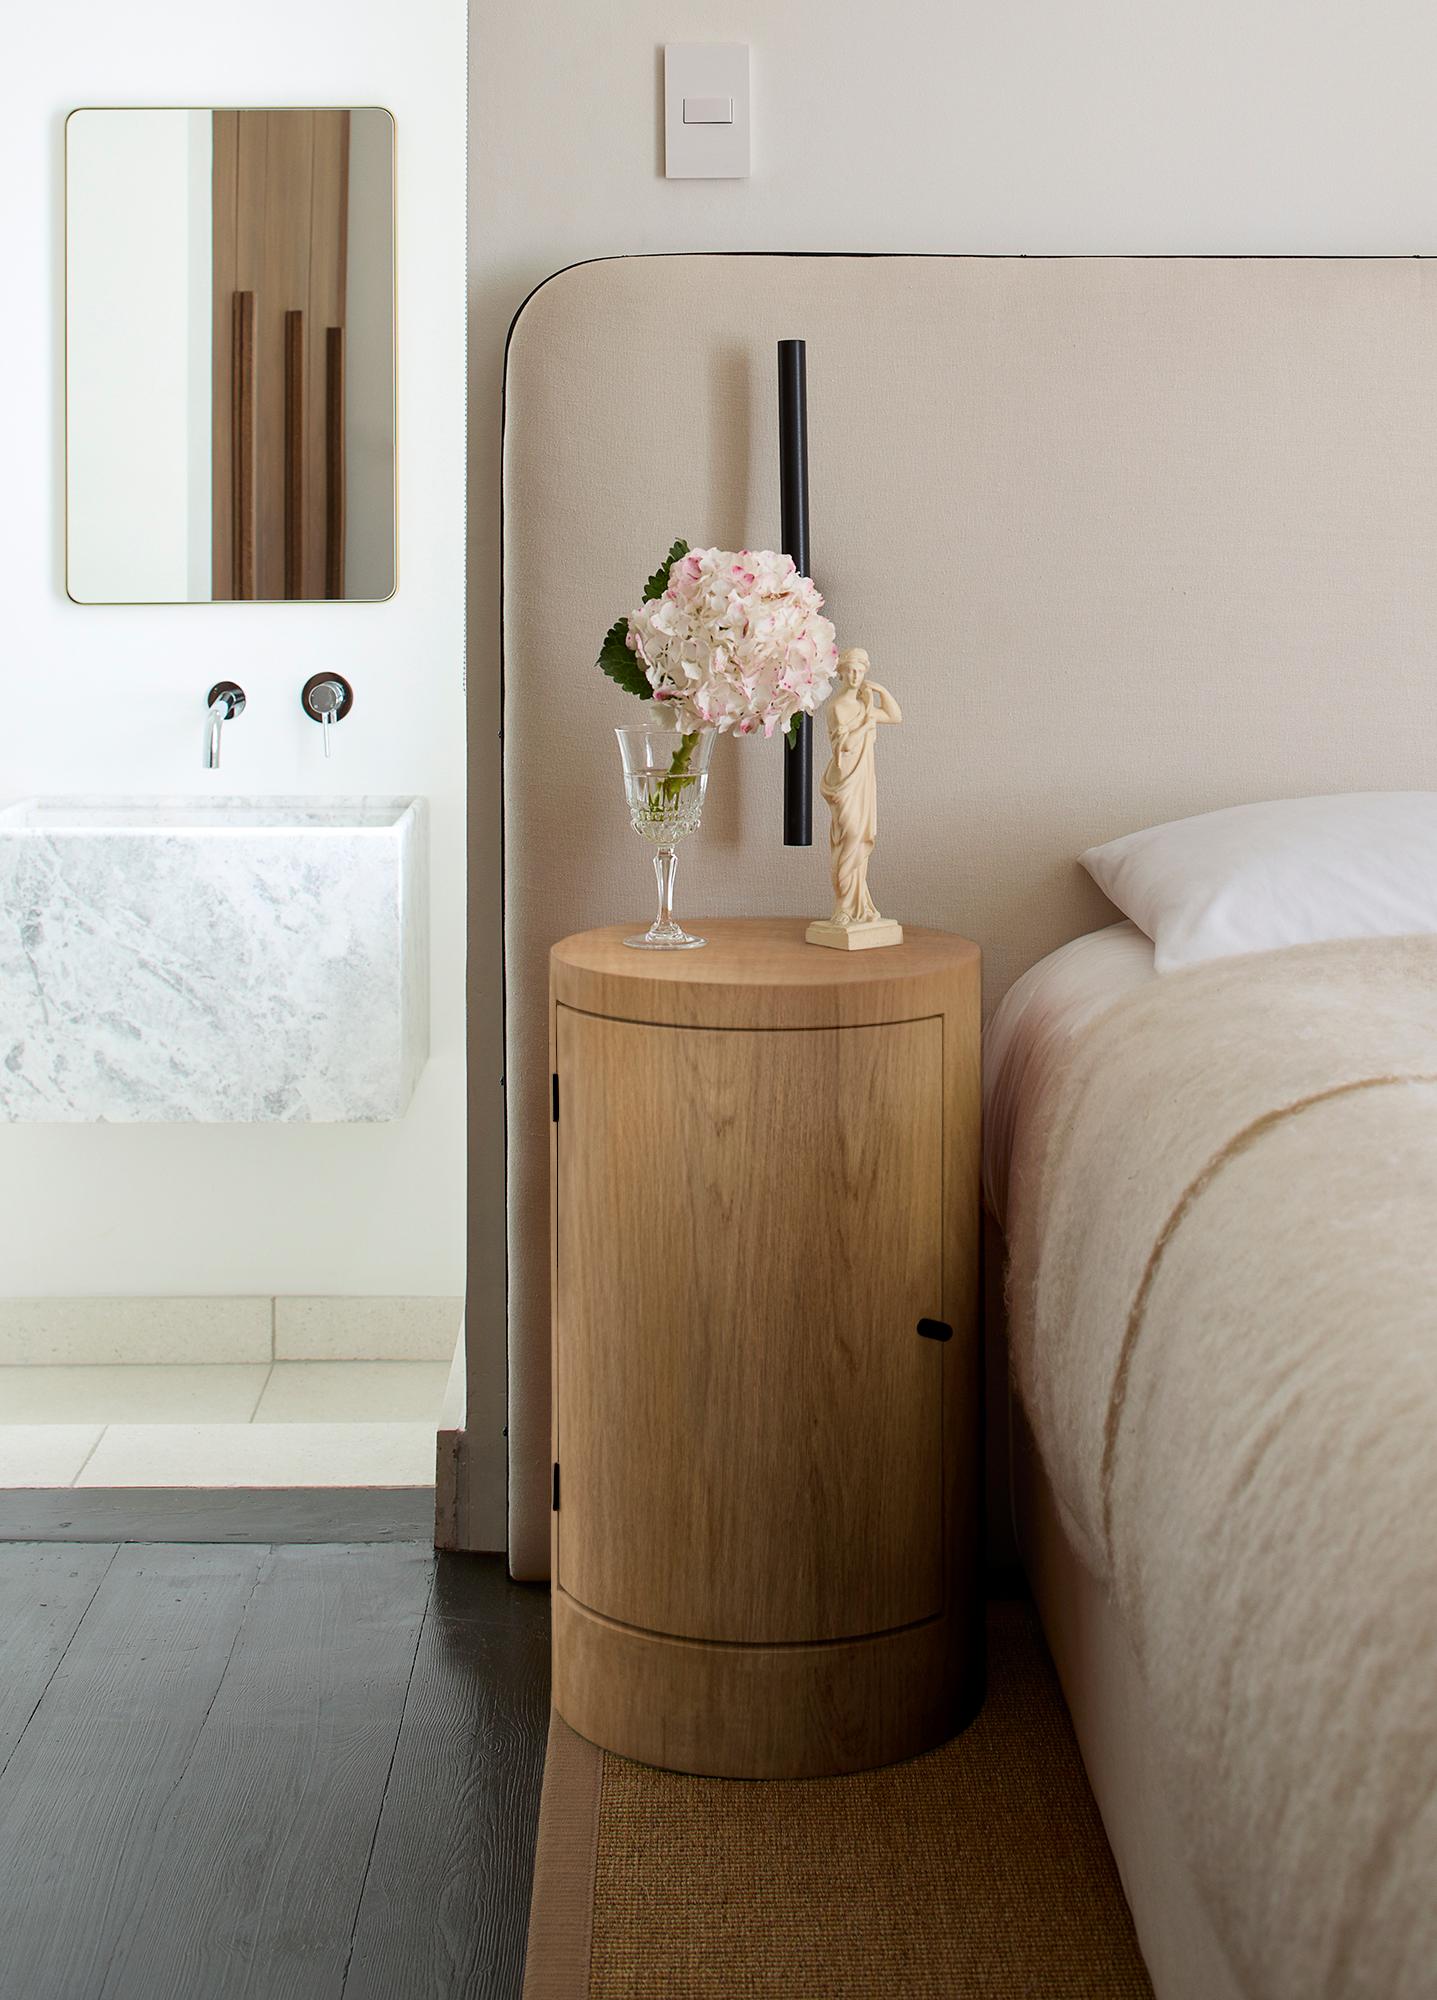 Envisioned by designer Yaniv Chen, the Constant nightstand exudes an air of refined luxury, celebrating the inherent splendor of wood. Meticulously crafted with impeccable proportions and attention to detail, the Constant nightstand stand is your